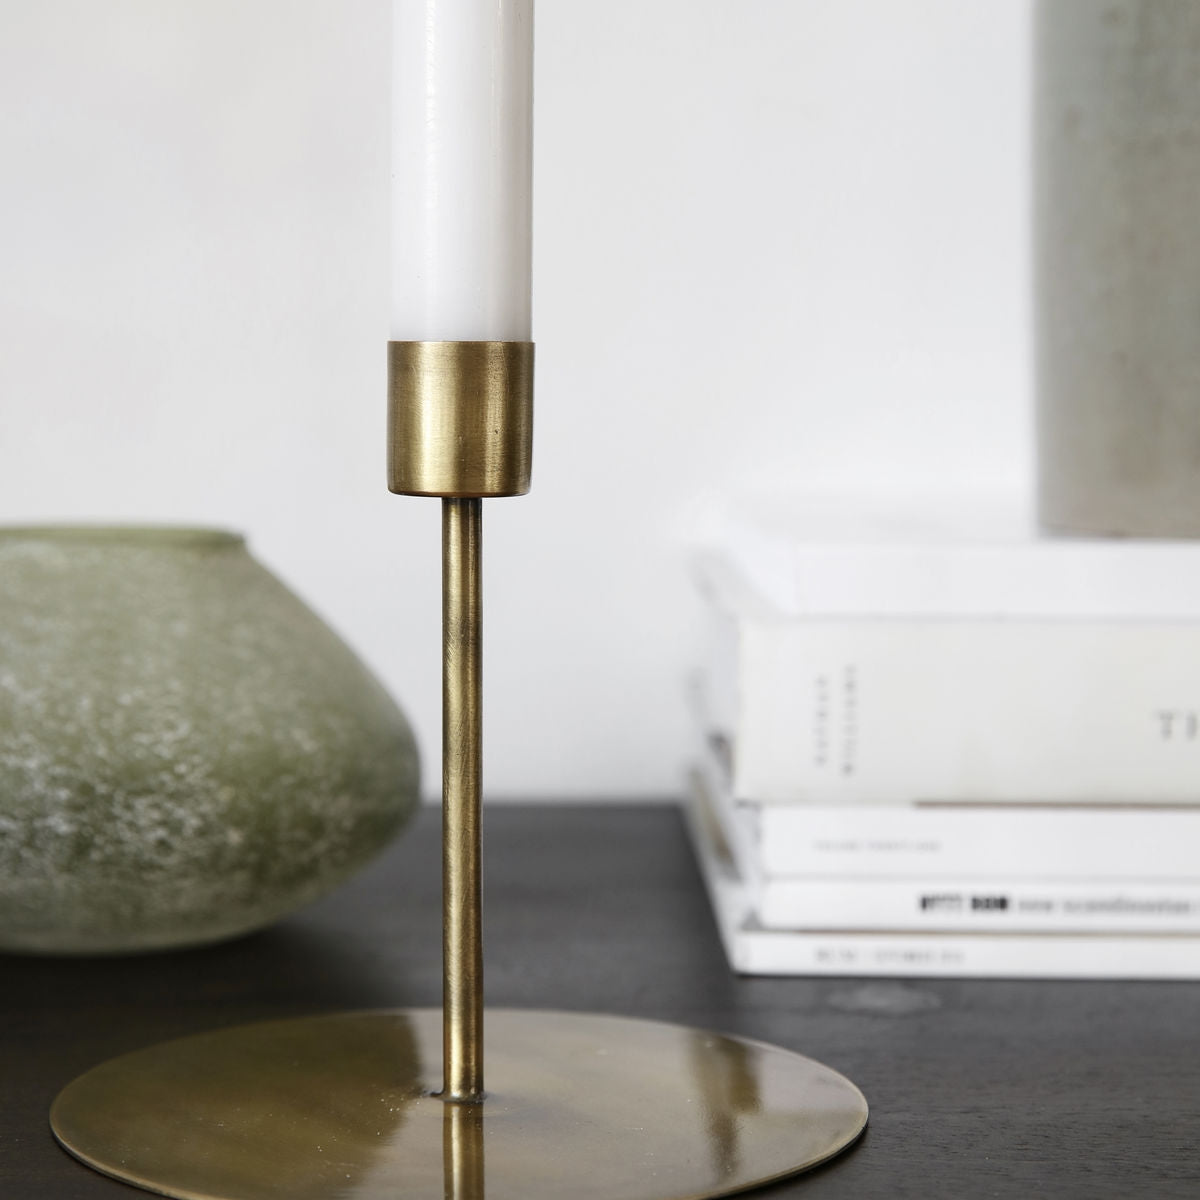 Candlestick in brushed brass